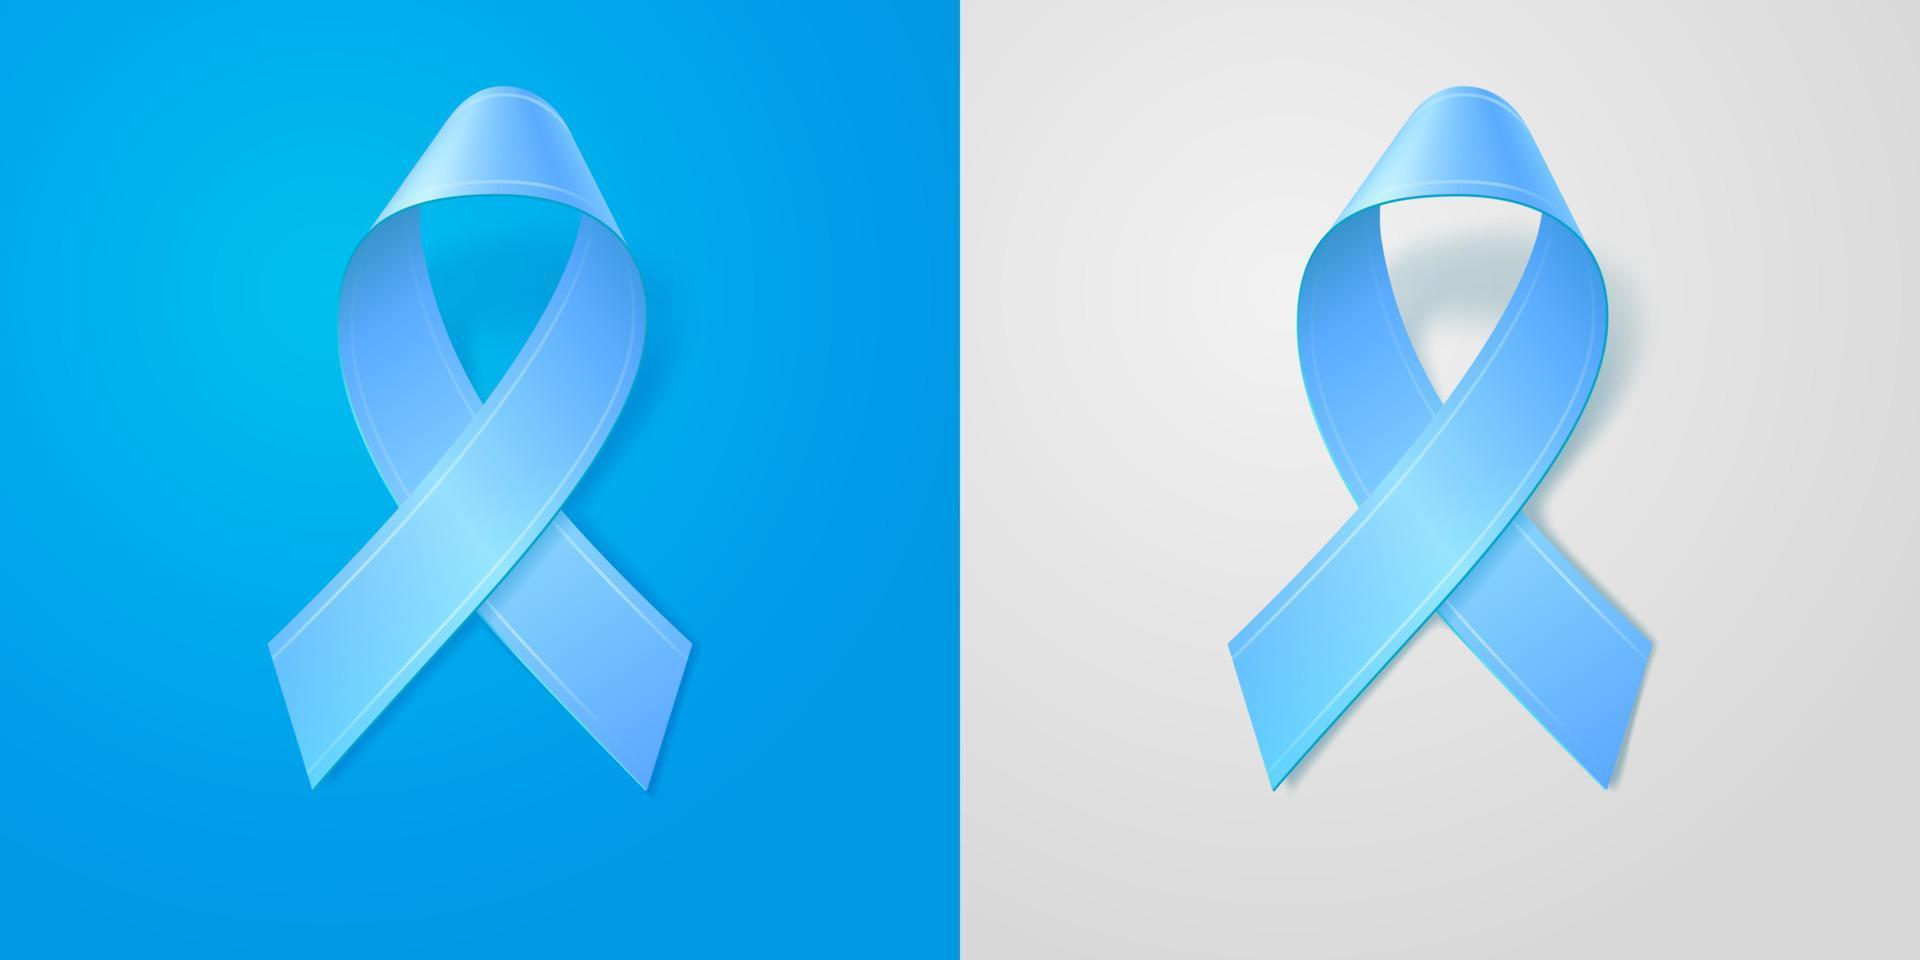 Realistic illustration blue ribbon with soft shadow on blue and gray isolated background. Prostate cancer awareness symbol. Editable vector template for design. 3d icon.